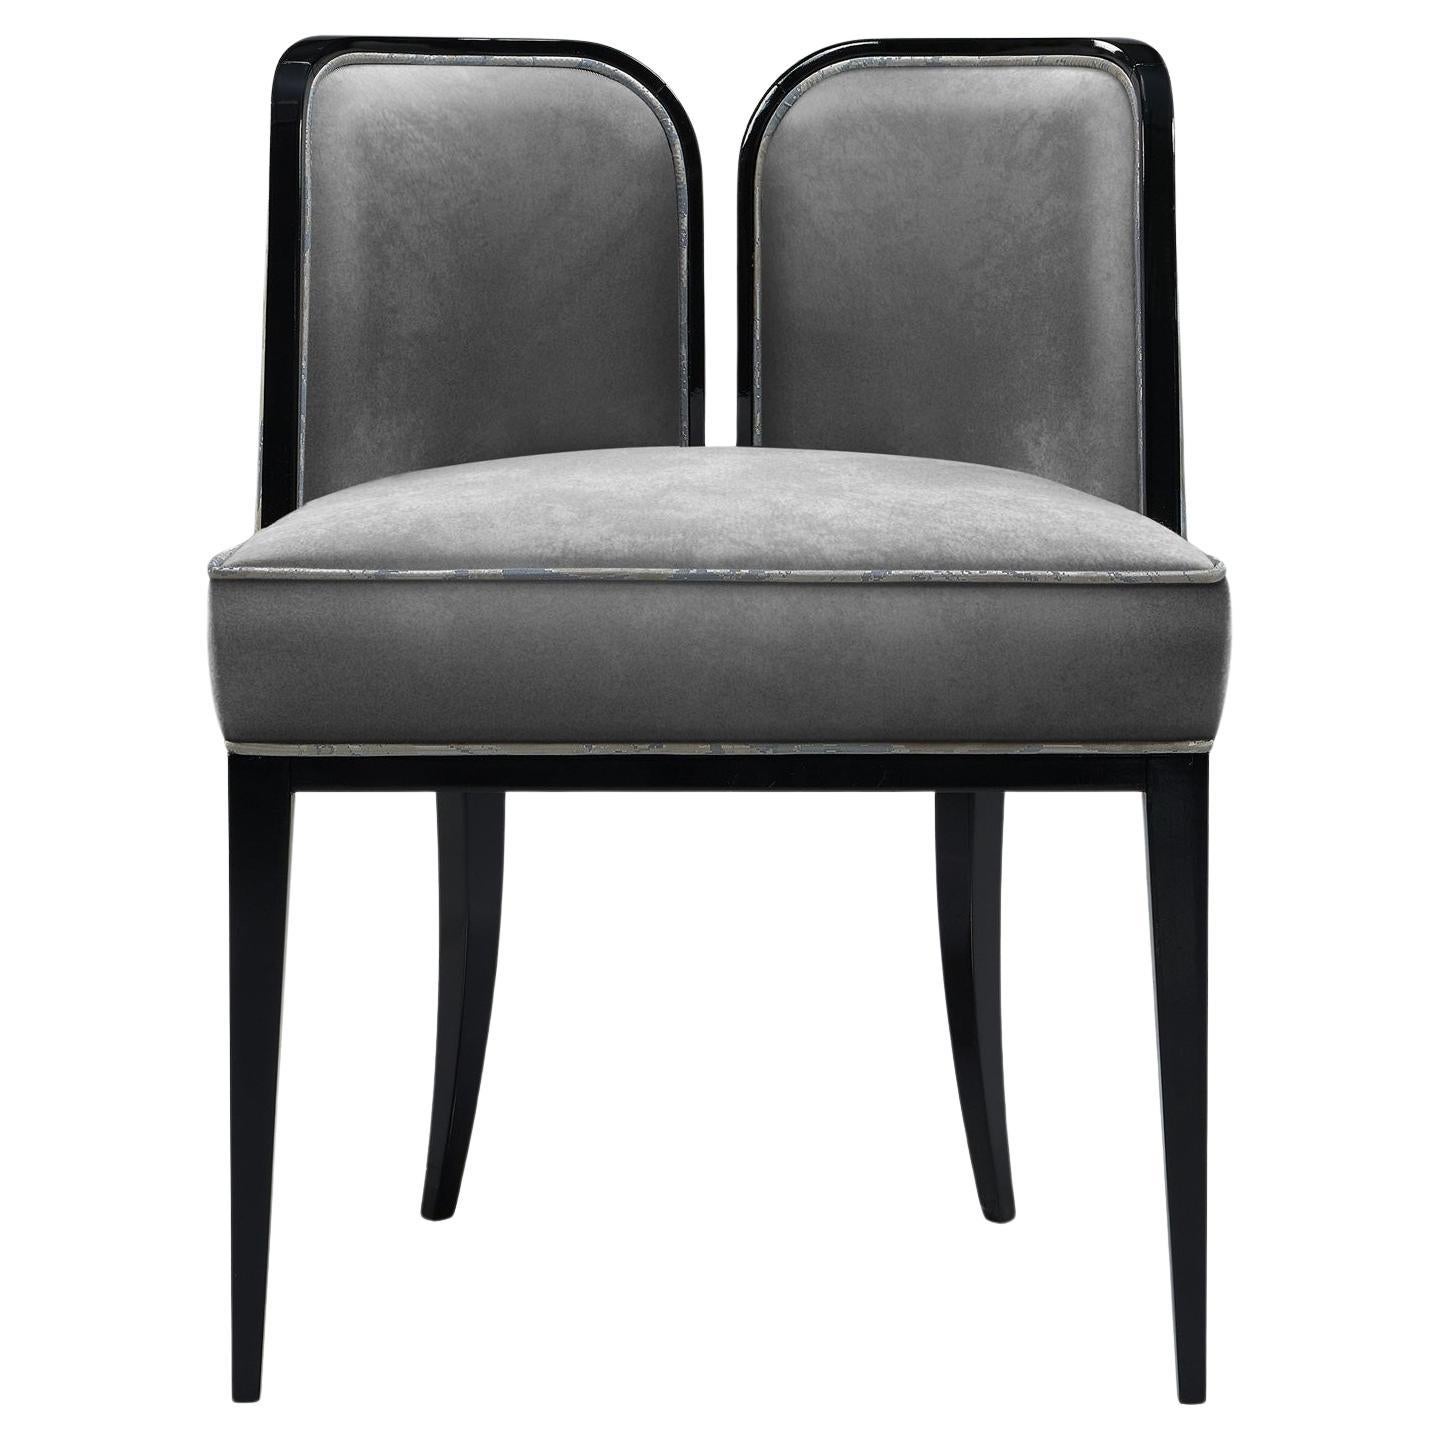 Colette Dining Chair by Memoir Essence